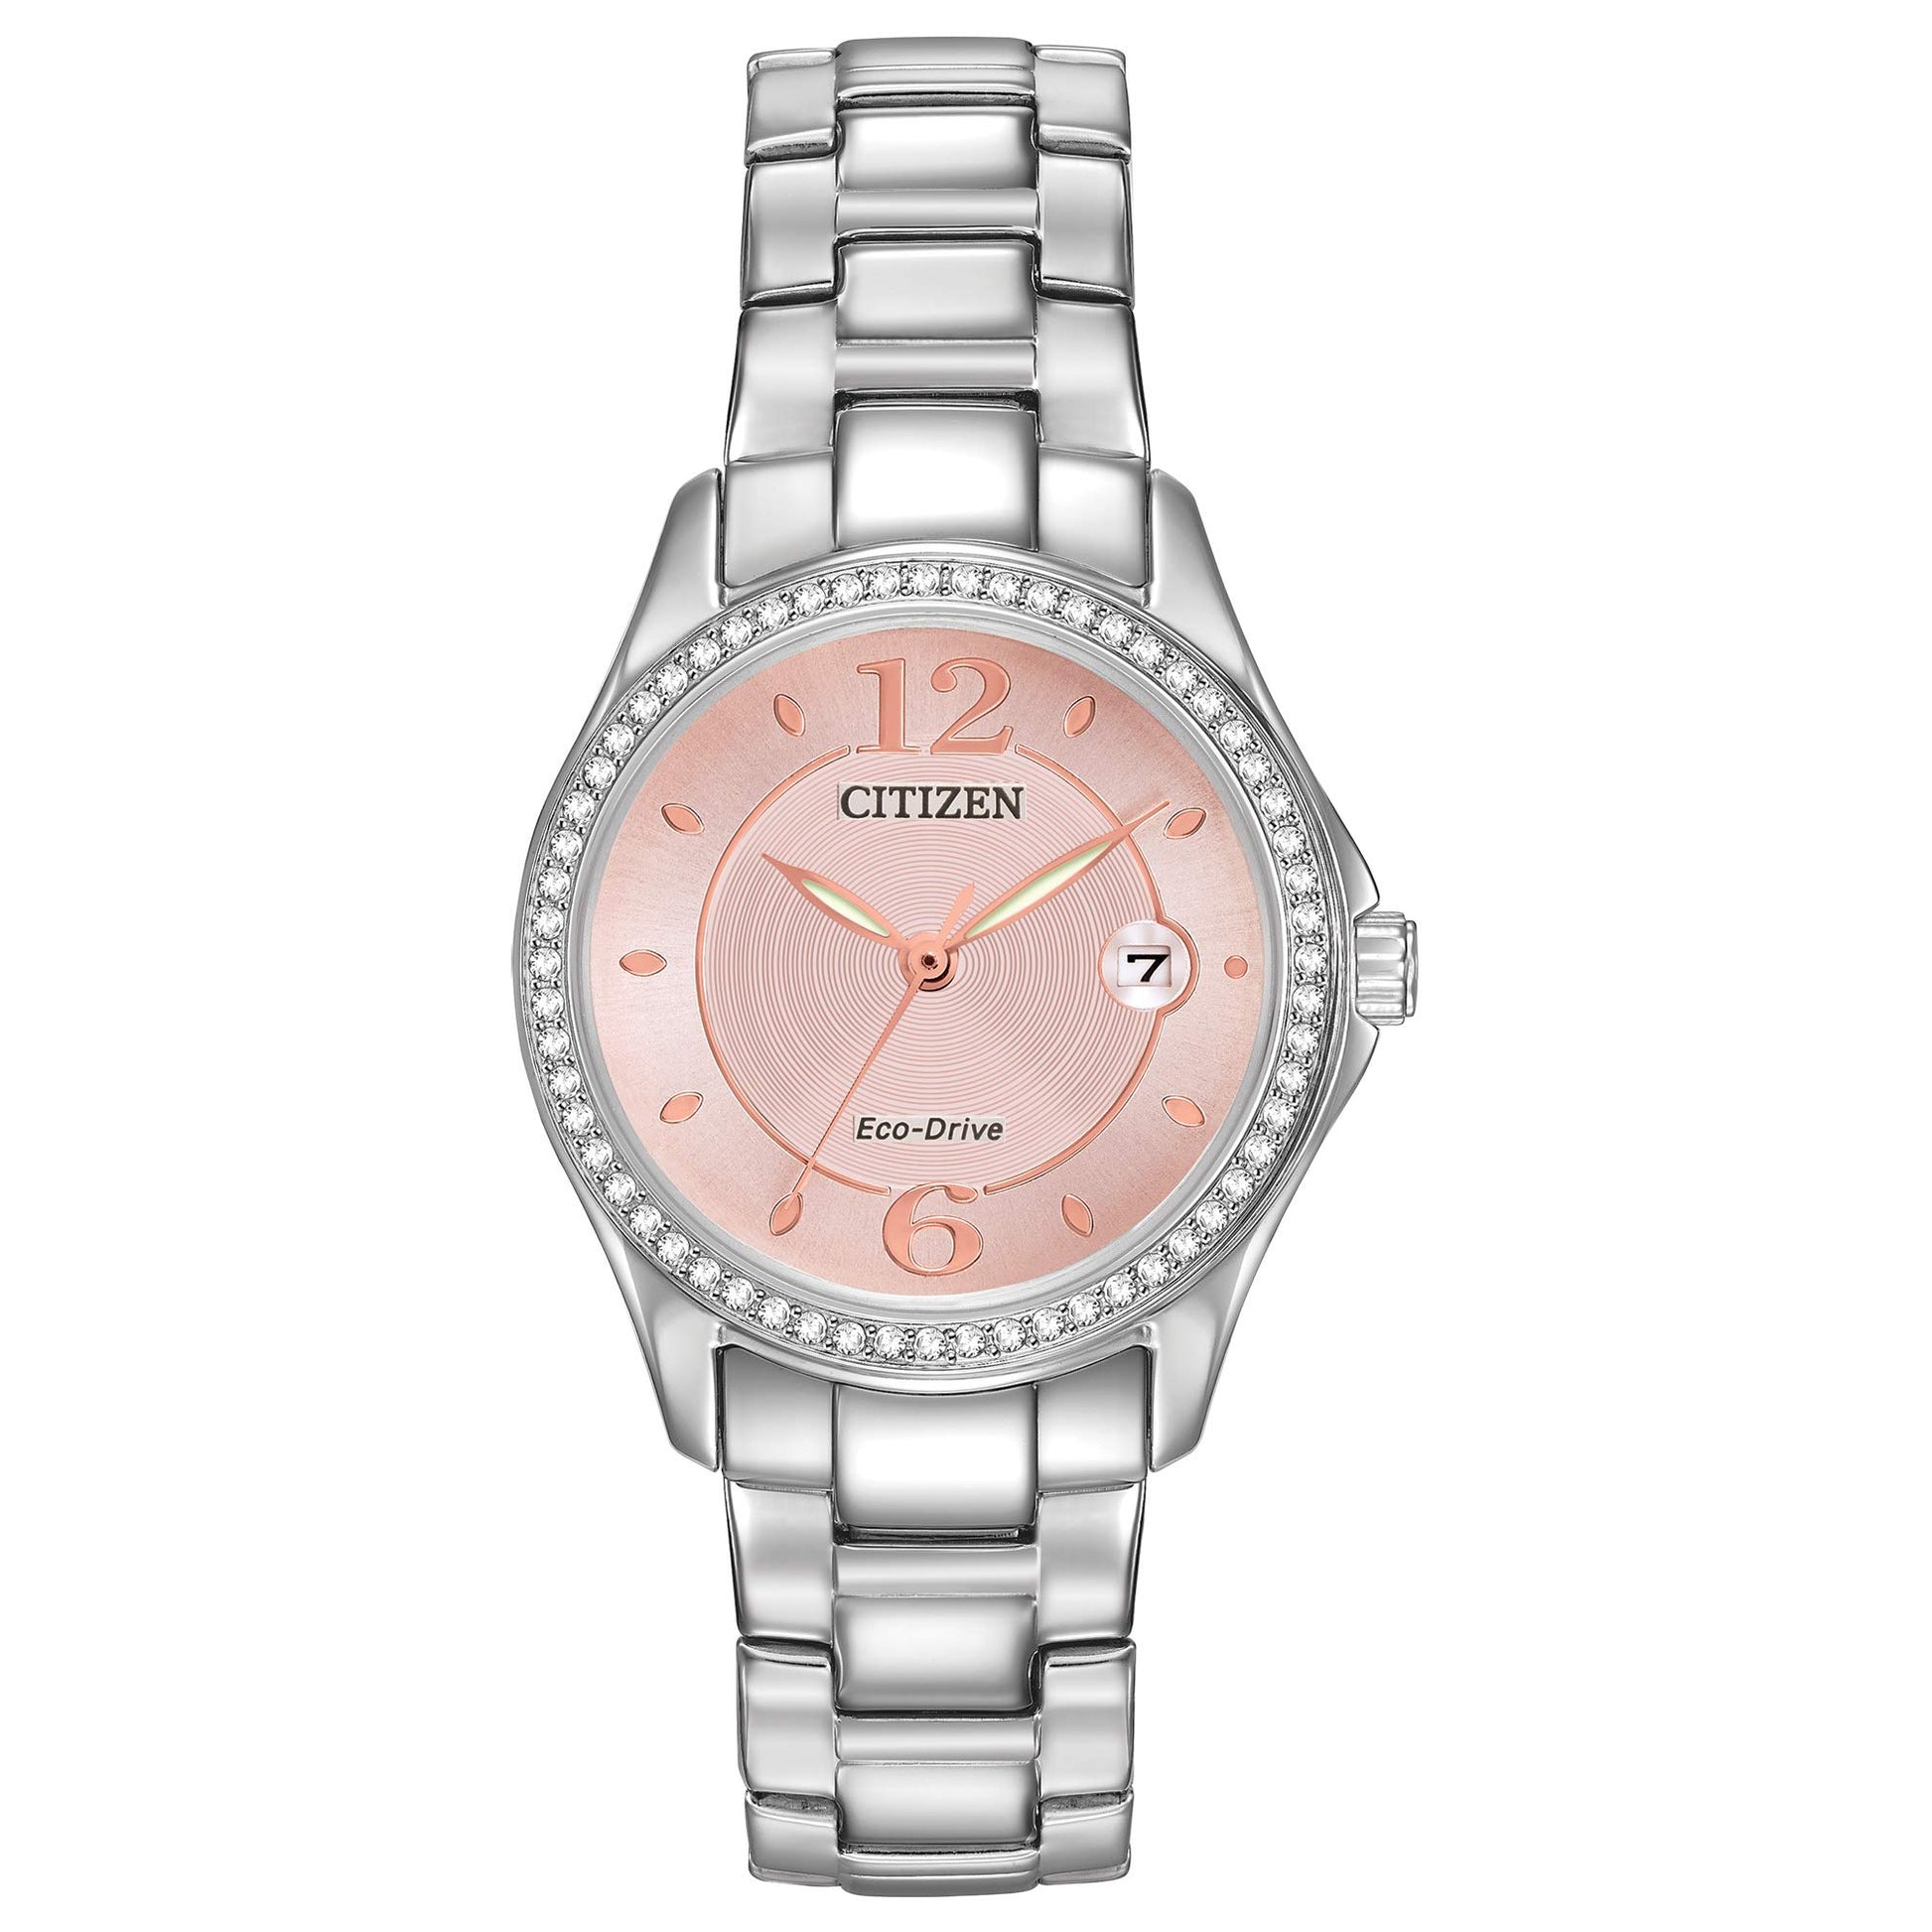 Citizen Eco-Drive Classic Quartz Women's Watch, Stainless Steel, Crystal, Phil and Gazelle